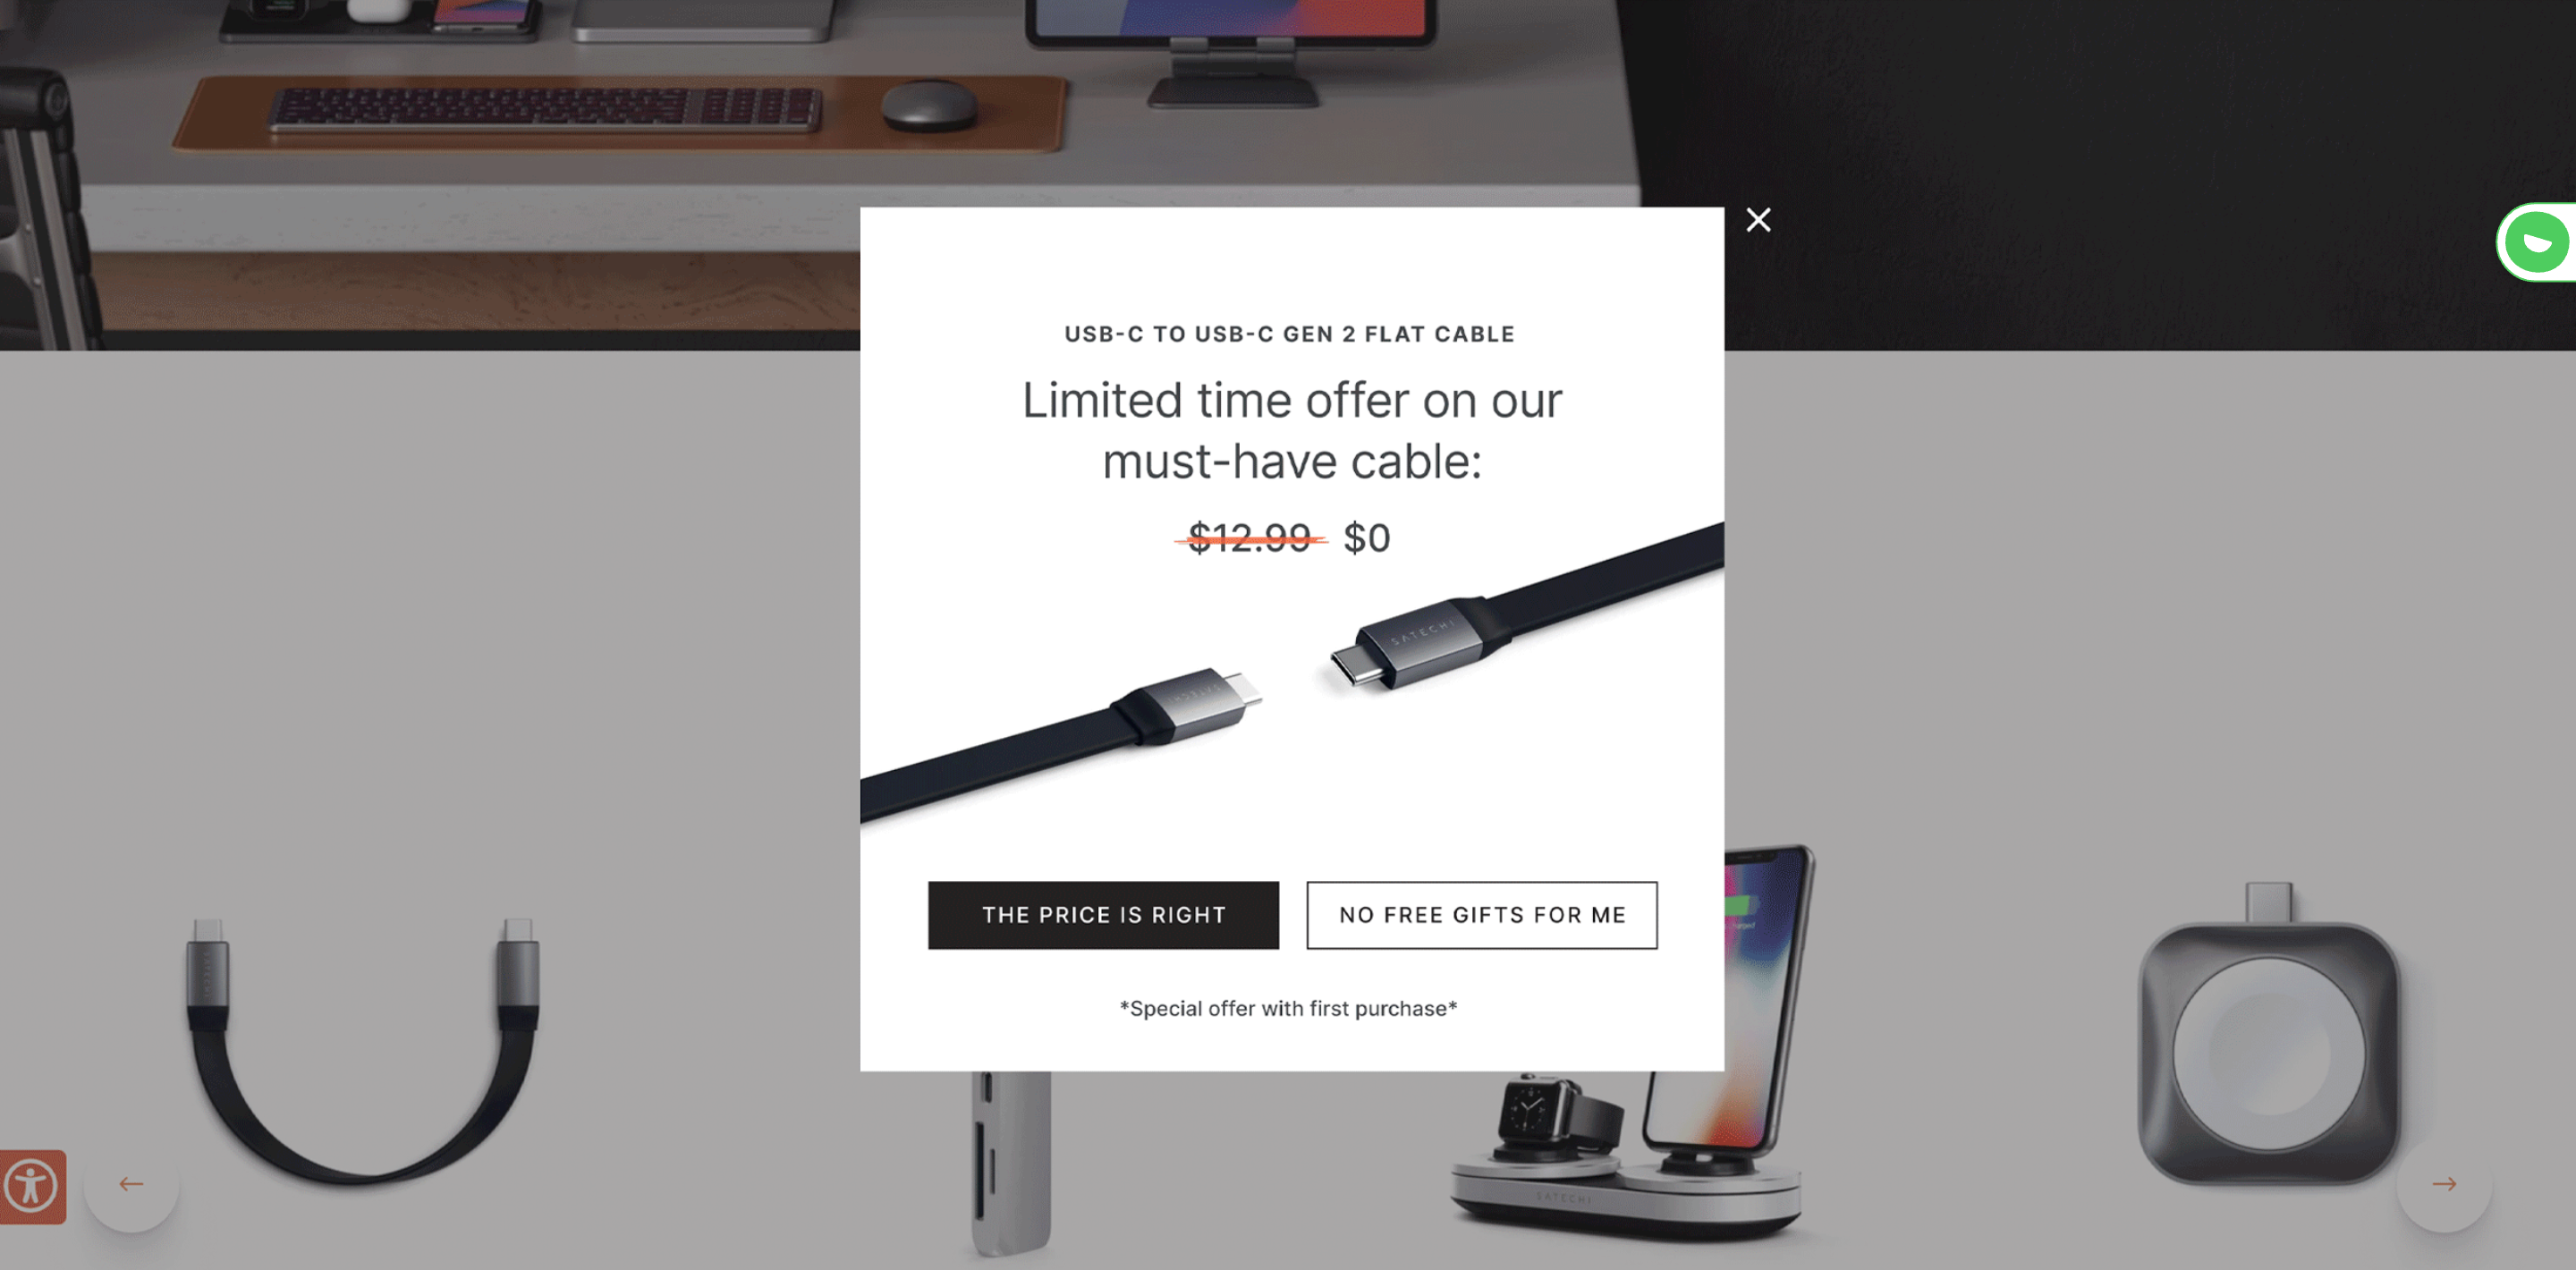 Pop-up from Satechi offering customers a free cable in exchange for their email address.